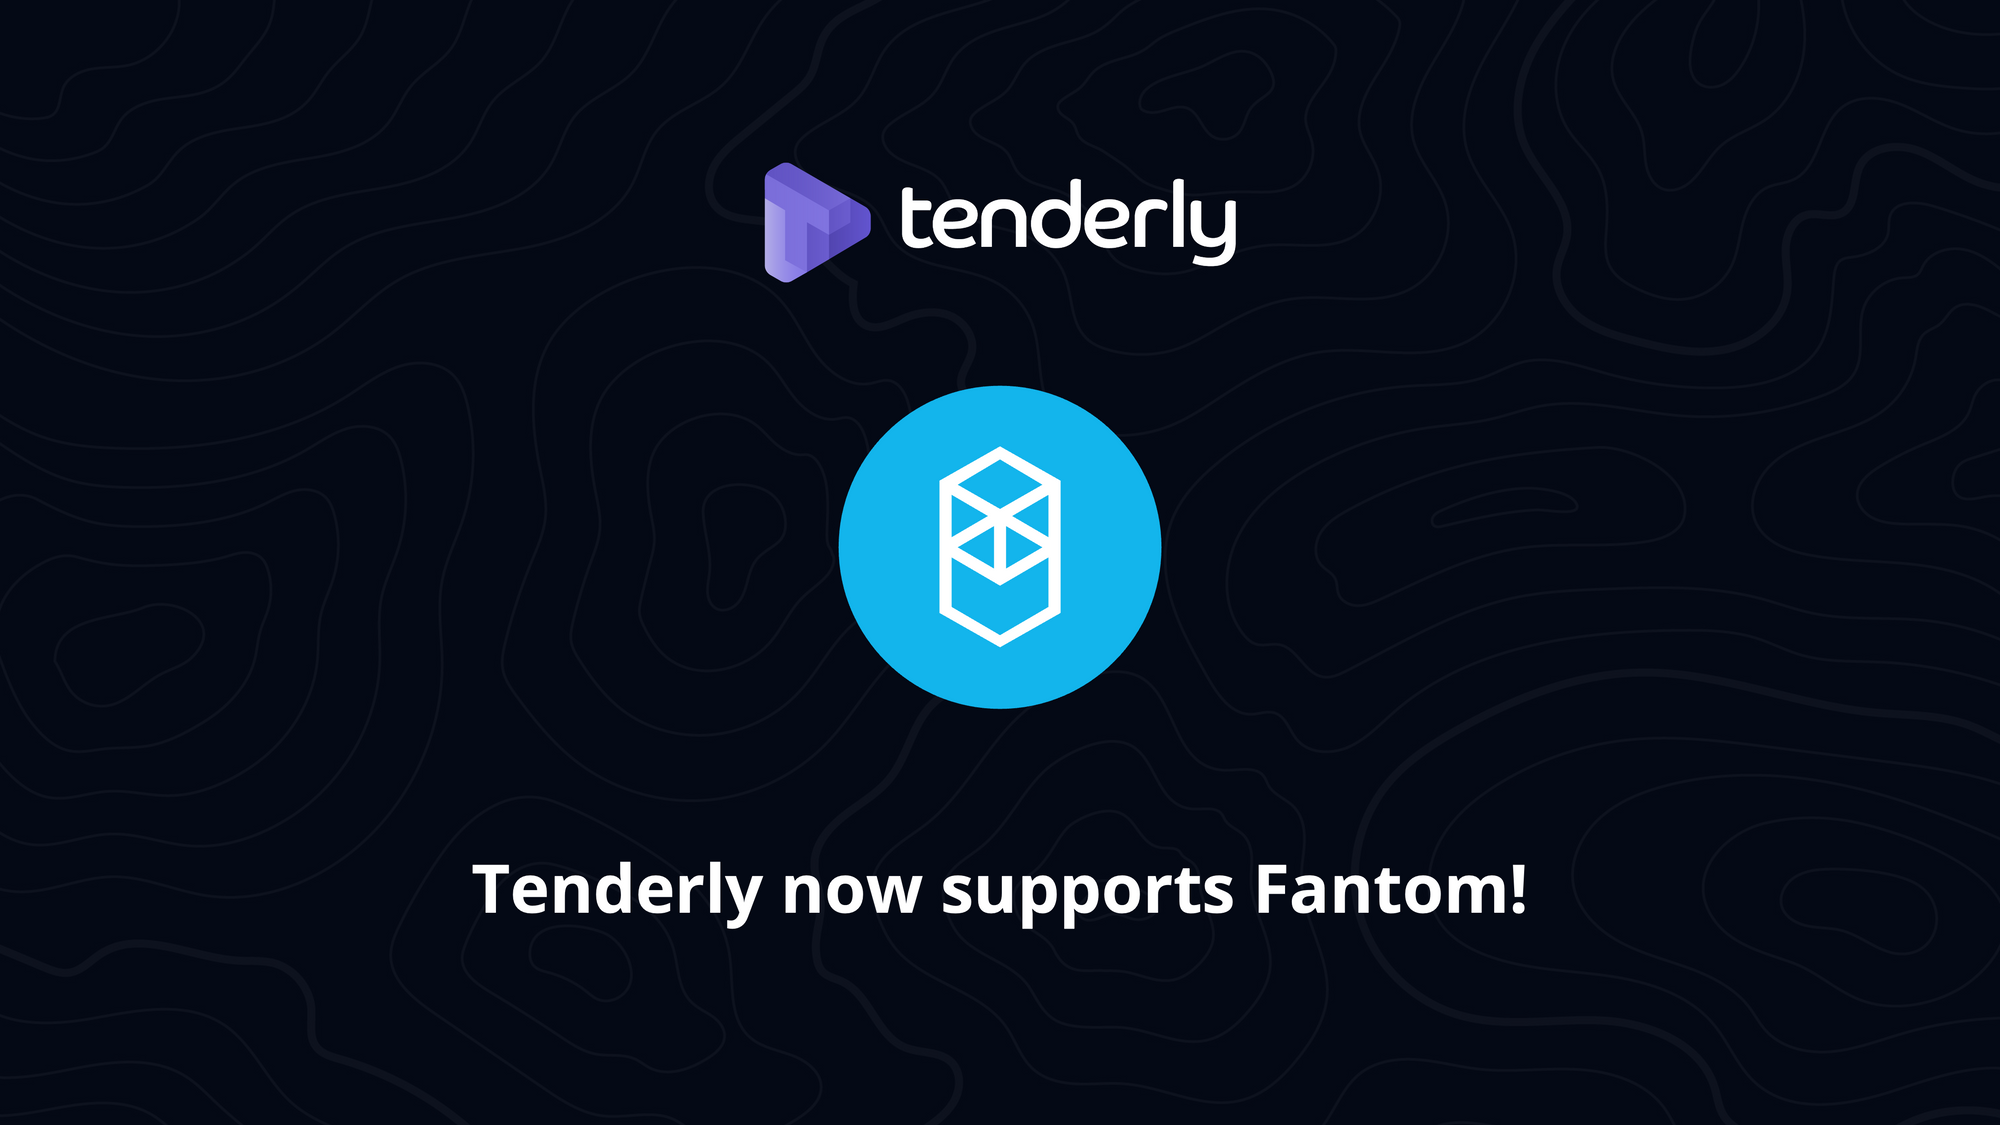 Tenderly integrates with Fantom!